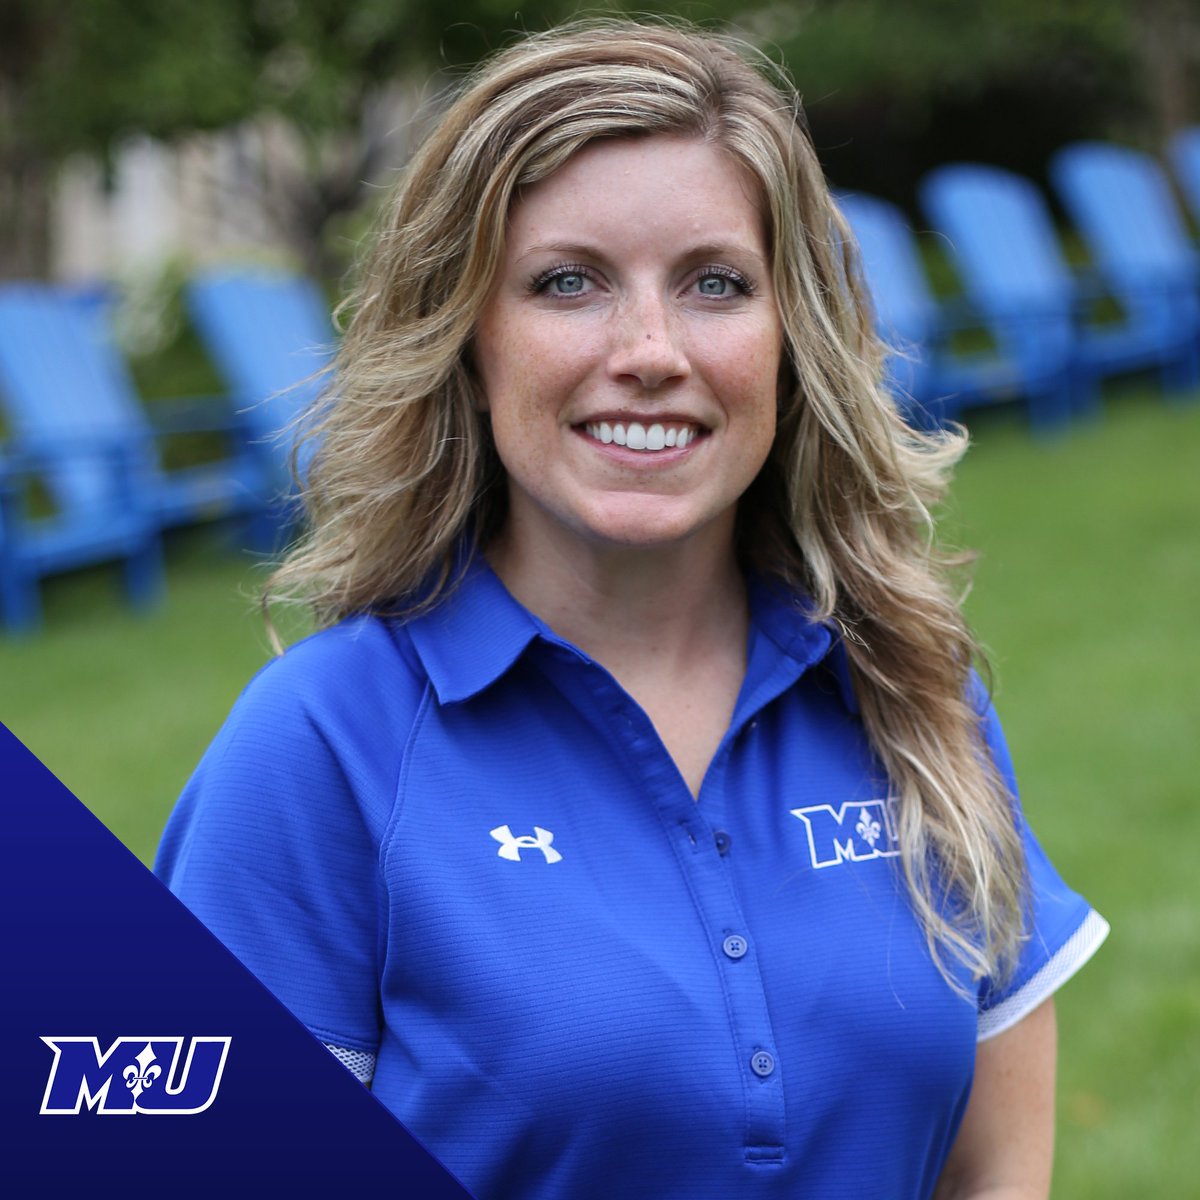 Marymount Athletics is pleased to announce the hiring of Lizzy Kienstra as our new Head Athletic Trainer ahead of the 2023-24 season. 🔗 Read the full release at MarymountSaints.com.